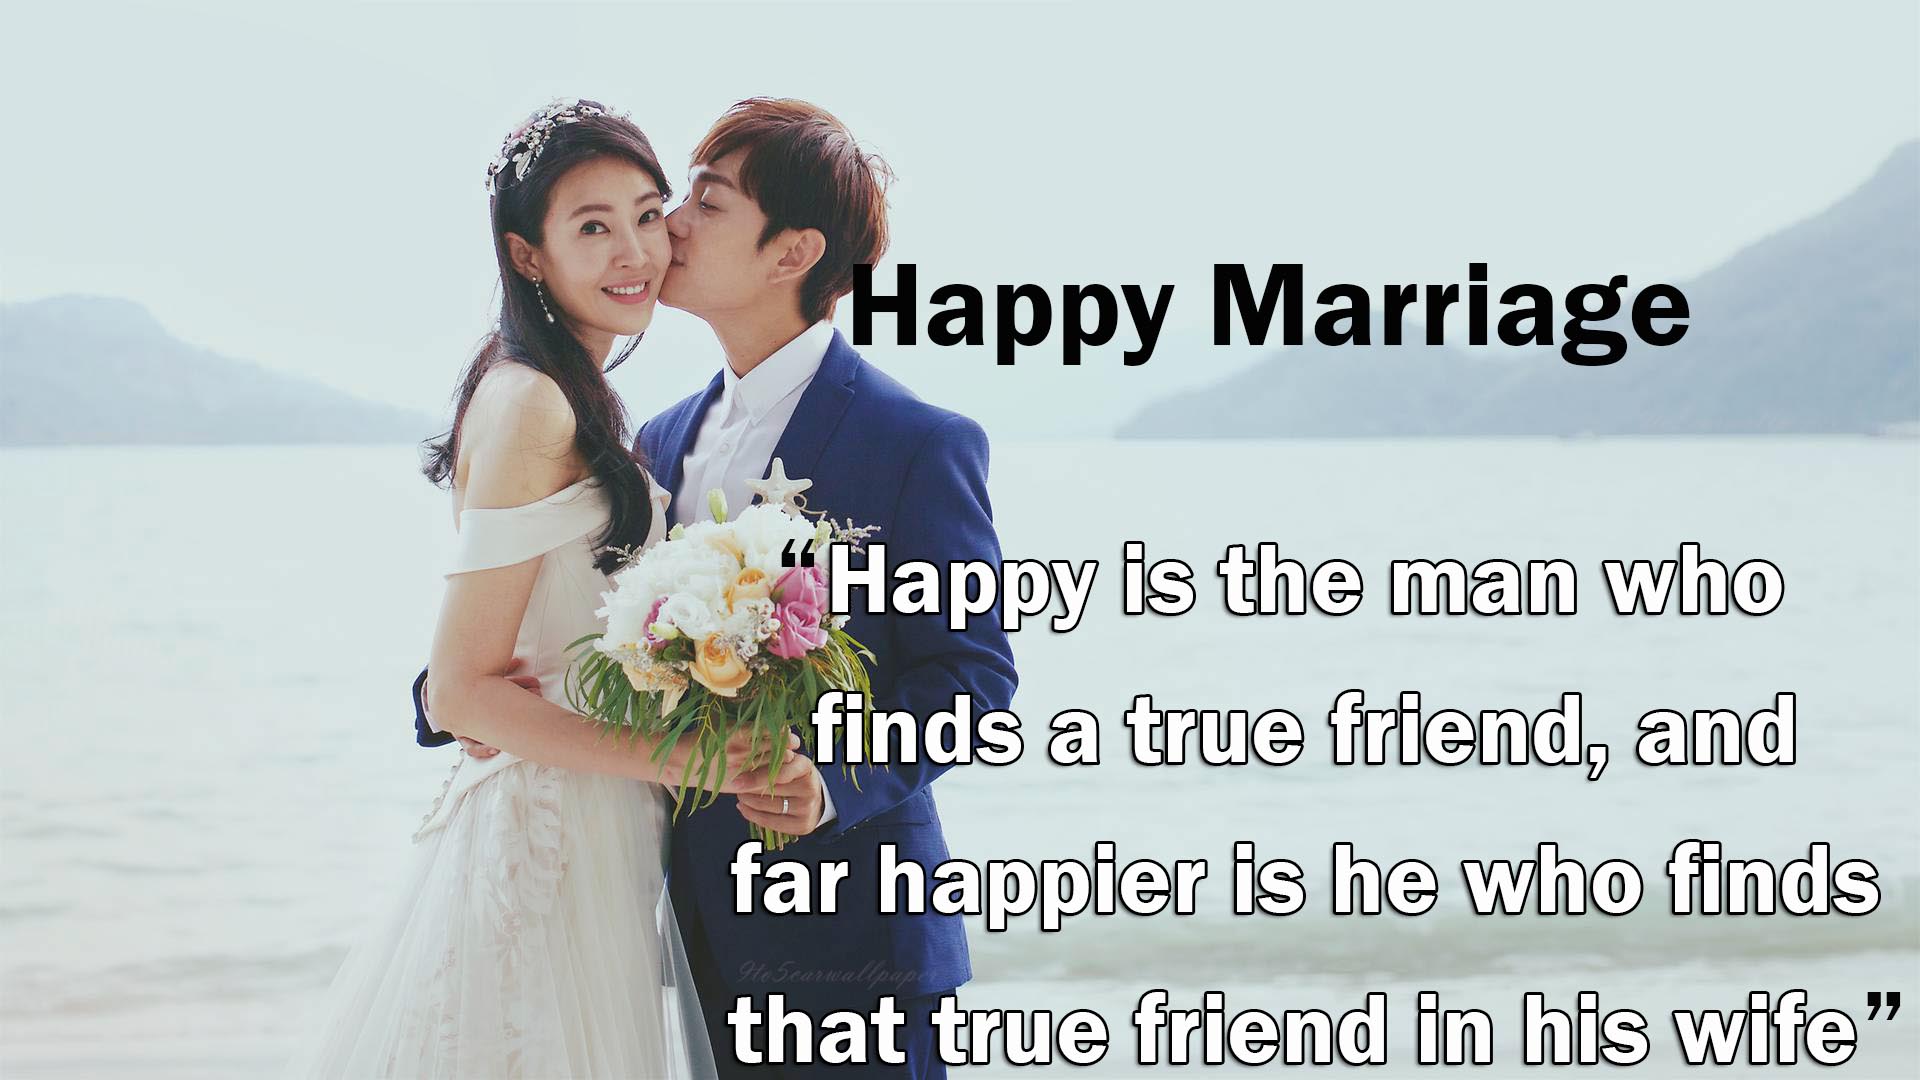  Wedding Wishes Quotes For Friend Wedding Wishes For Best Friend 